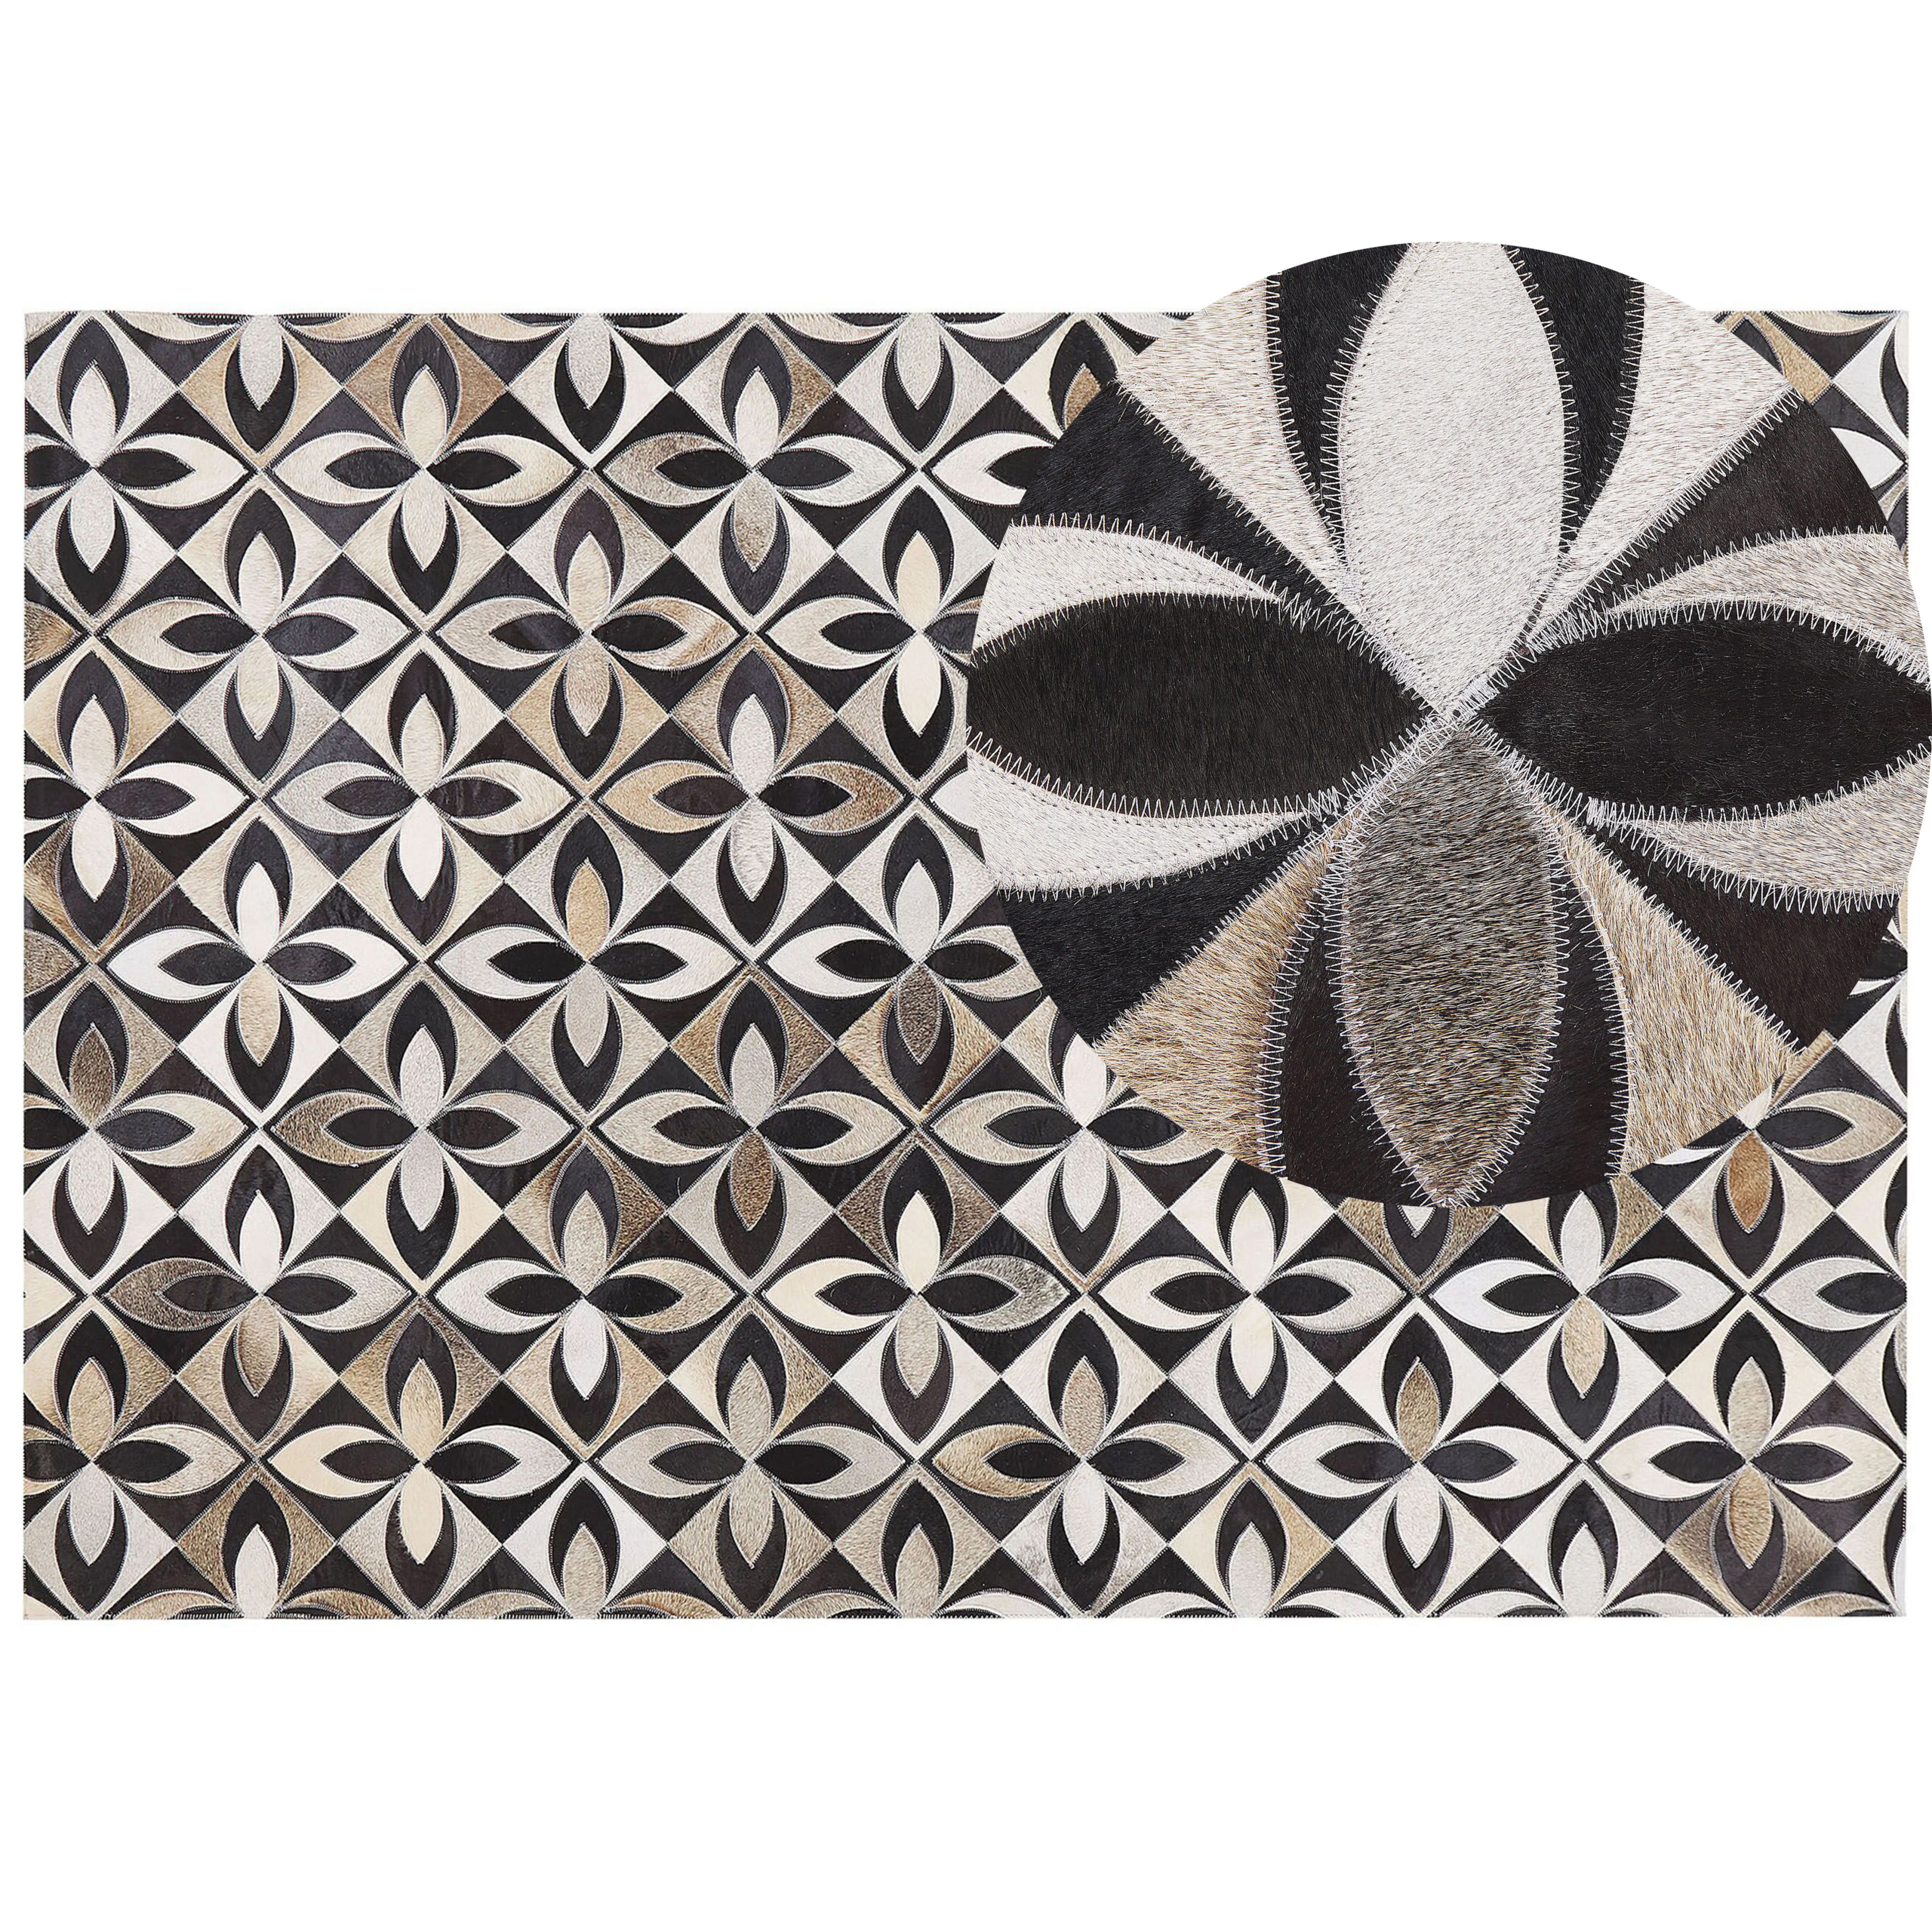 Beliani Area Rug Black and White Cowhide Leather 160 x 230 cm Floral Pattern Patchwork